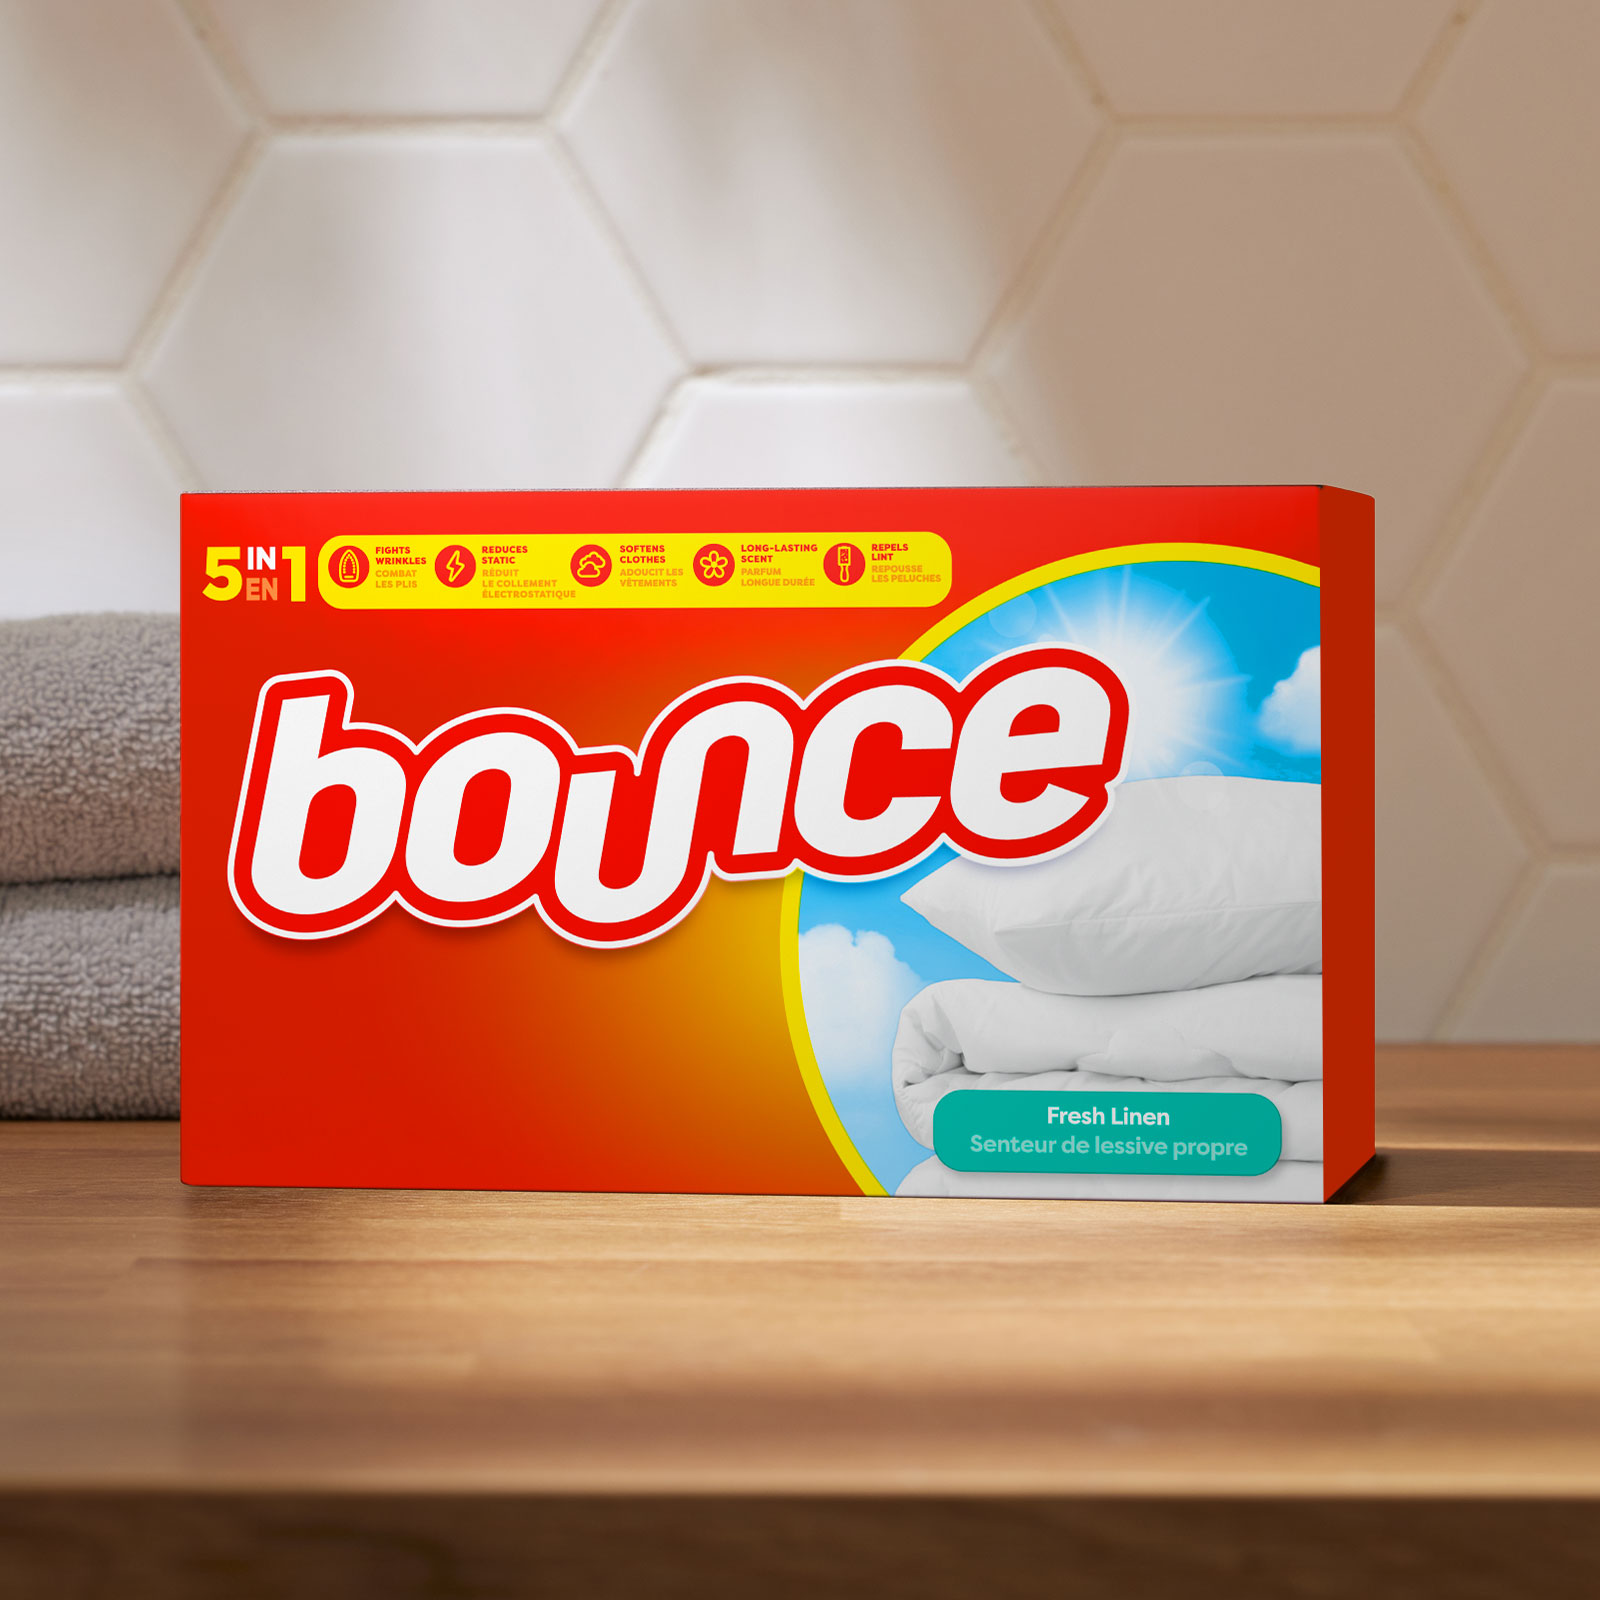 Ultimate Guide To Dryer Sheets And Fabric Softener Sheets: Reviews And  Information